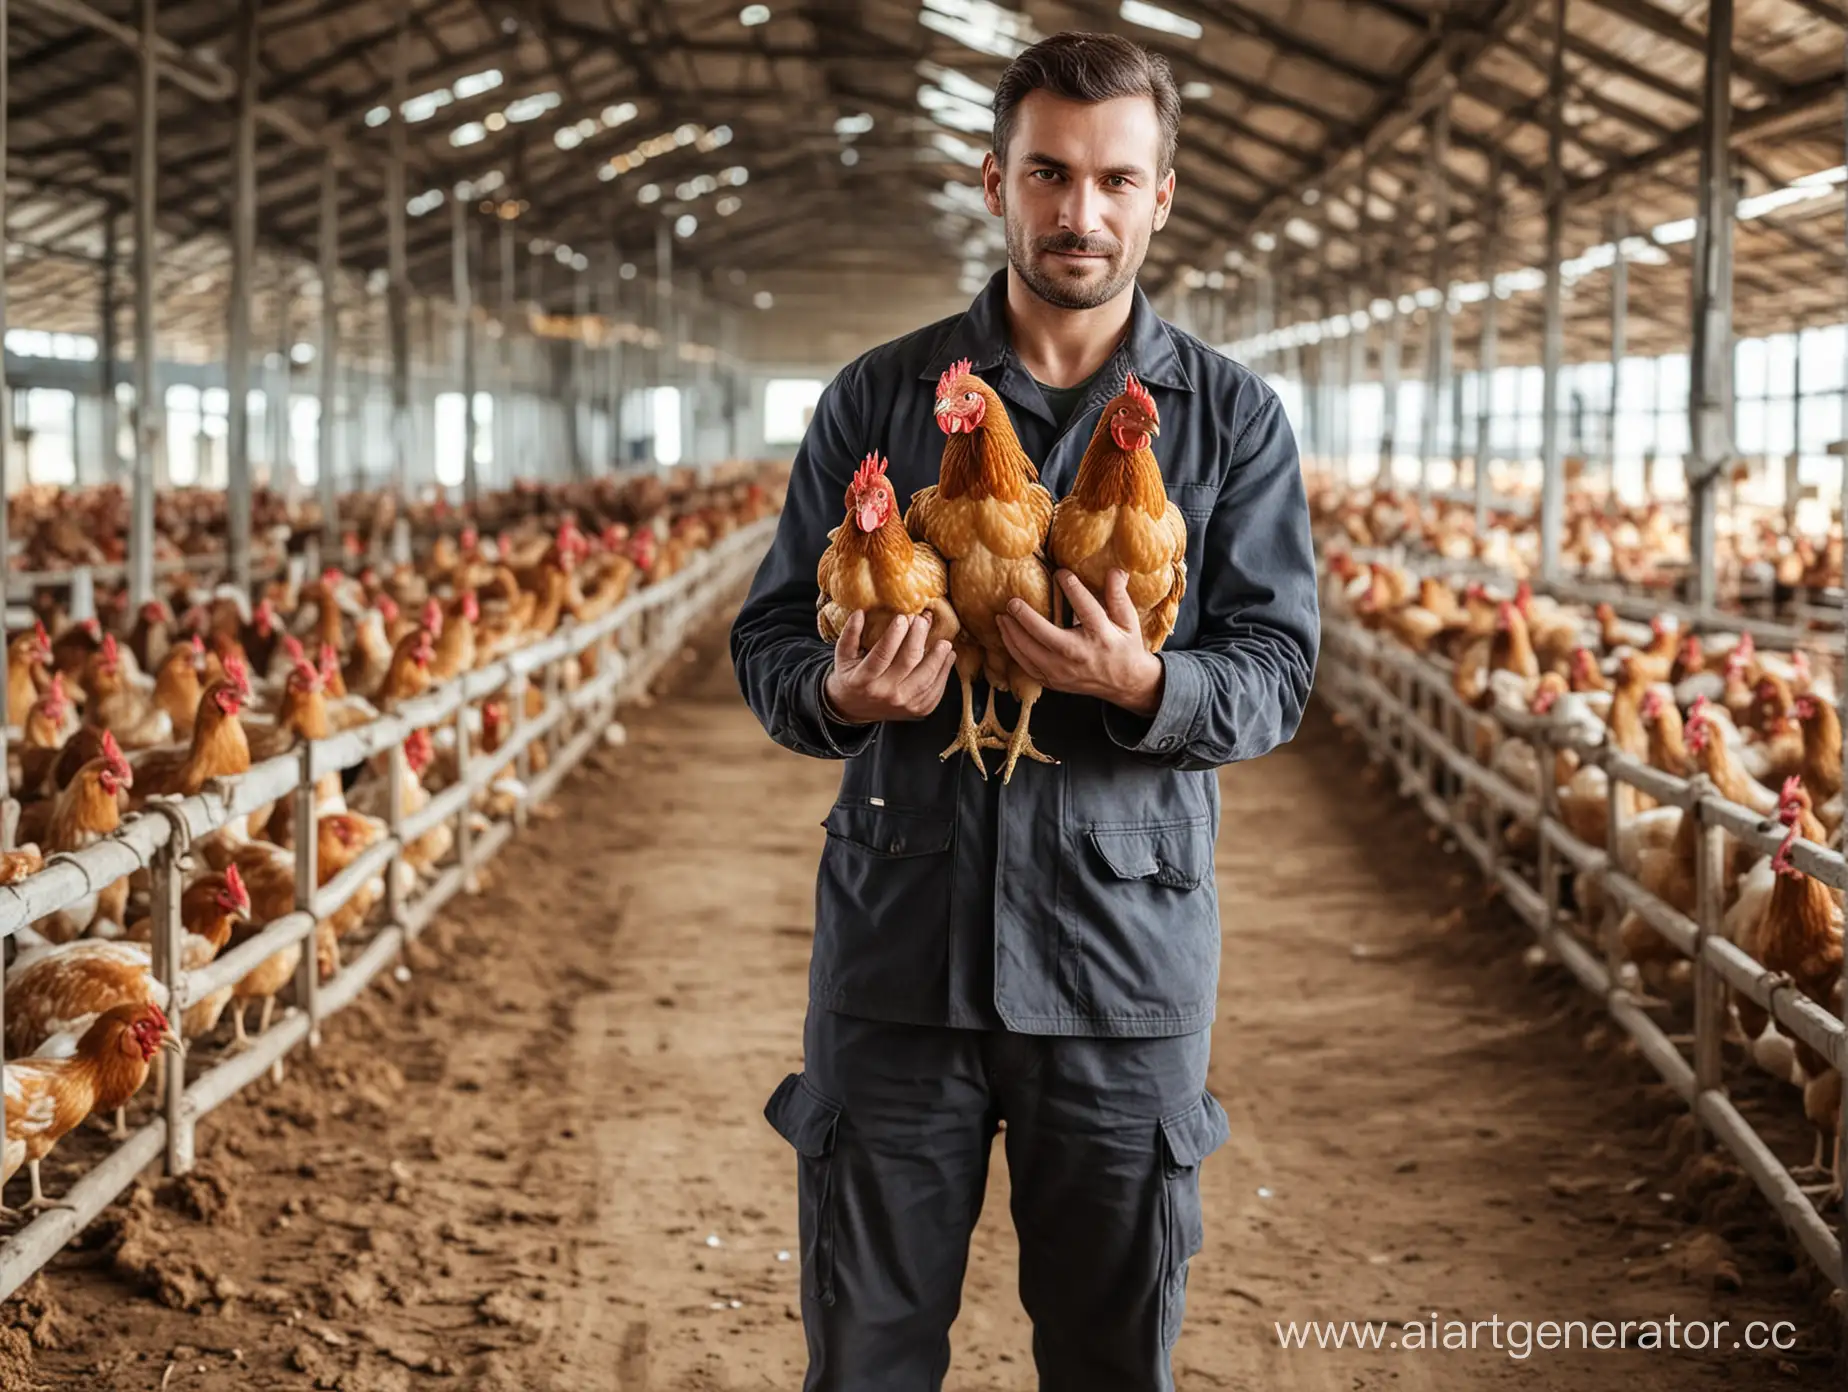 Poultry-Farm-Worker-Holding-Chicken-Authentic-portrayal-of-a-man-worker-with-a-chicken